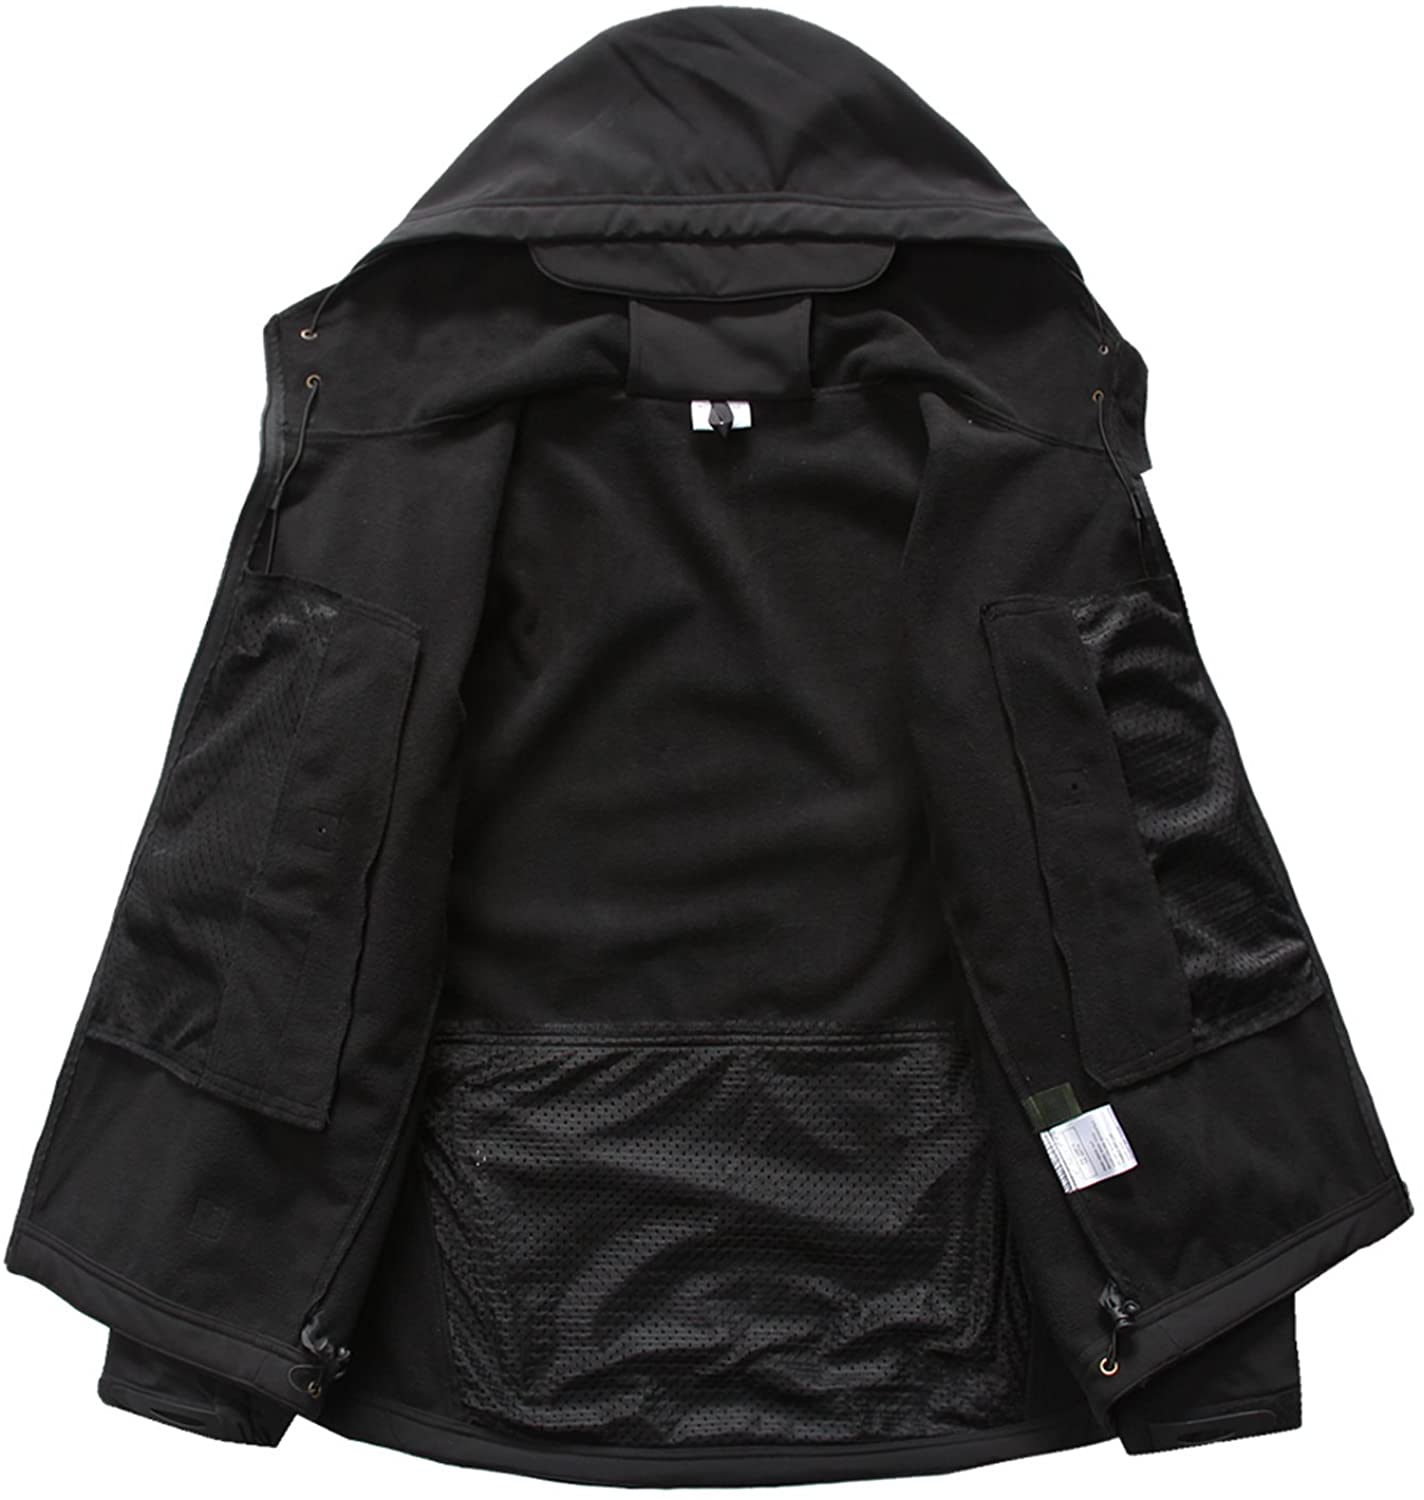 Men's Water Resistant Tactical Jacket - Cycorld